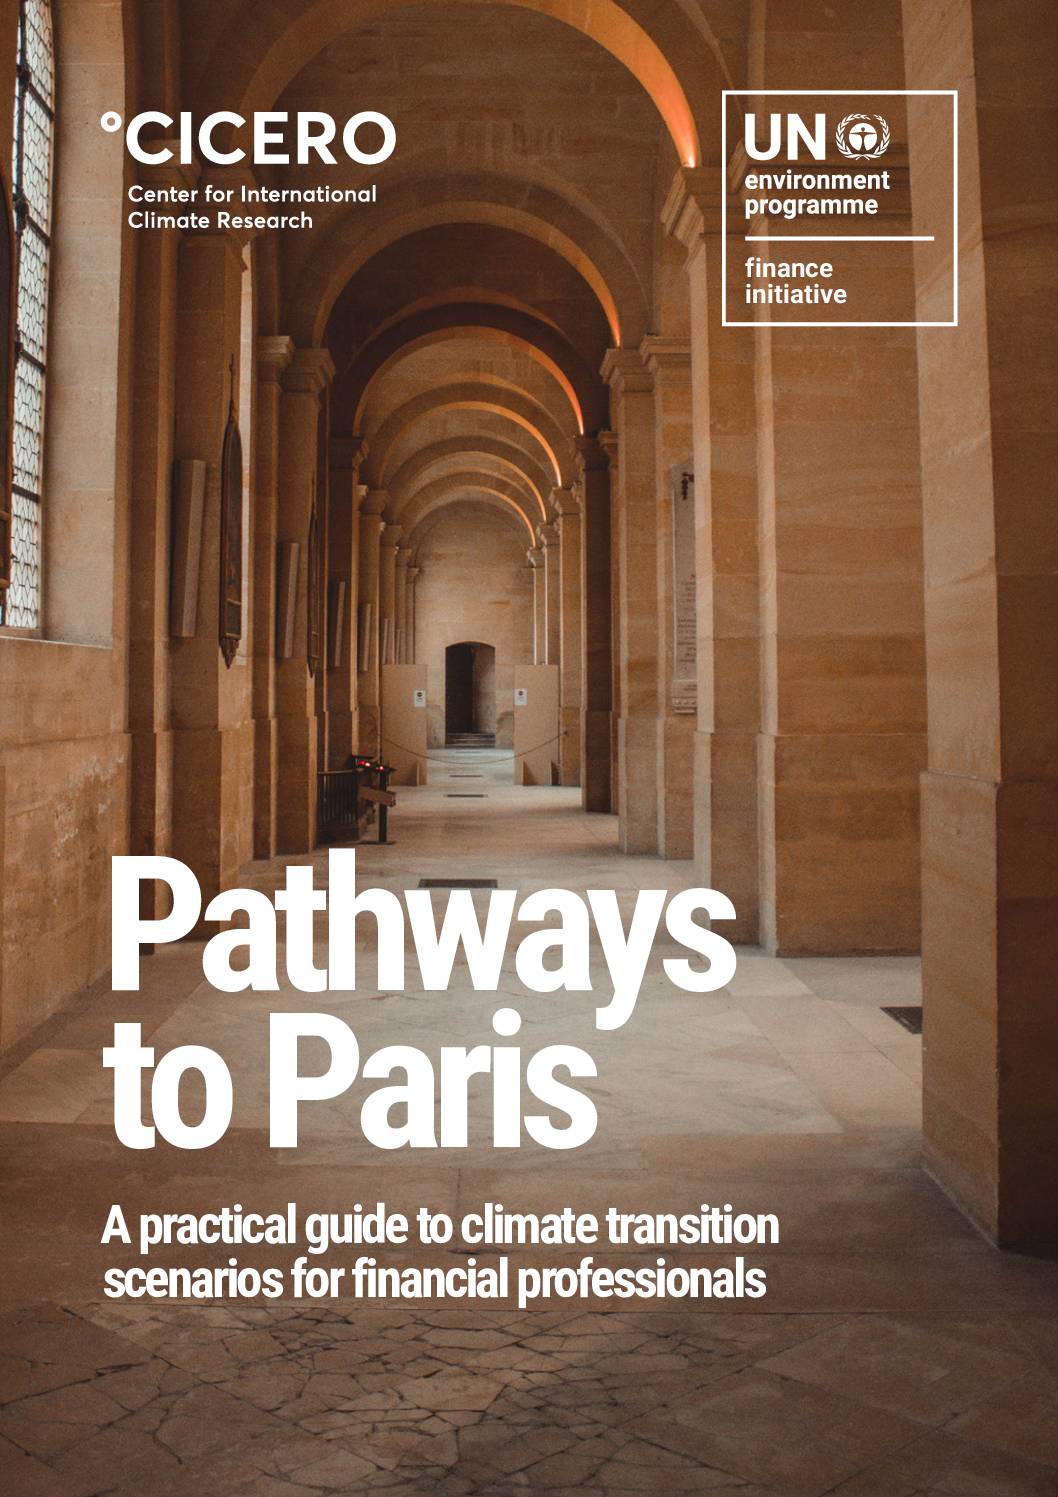 Pathways to Paris: A Practical Guide to Transition Scenarios for Finance Professionals